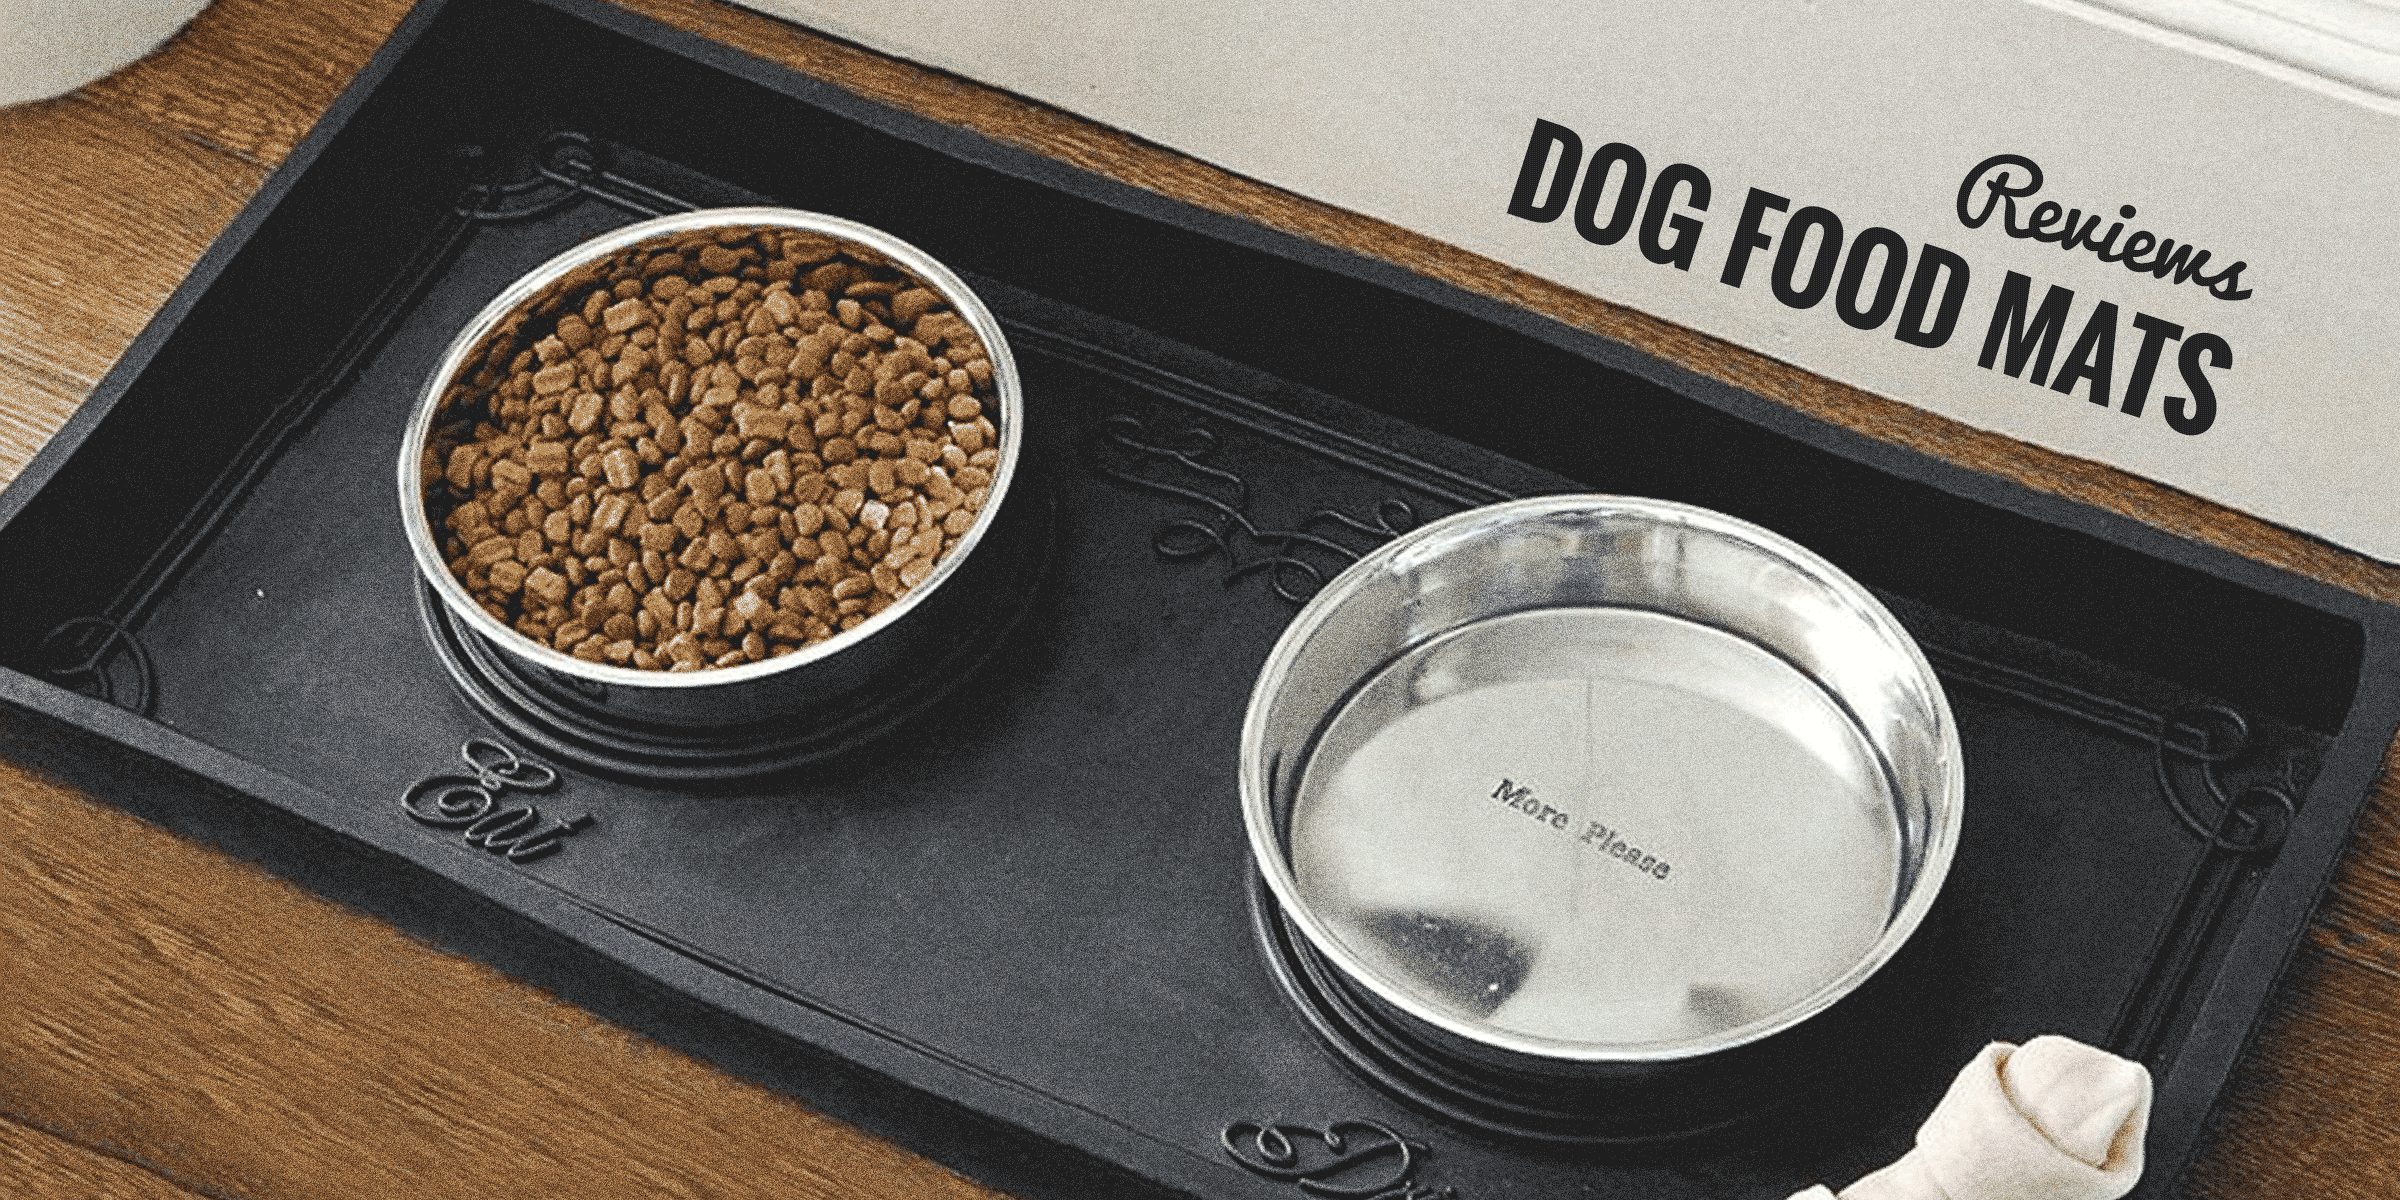 5 Best Dog Food Mats For Messy Eaters 